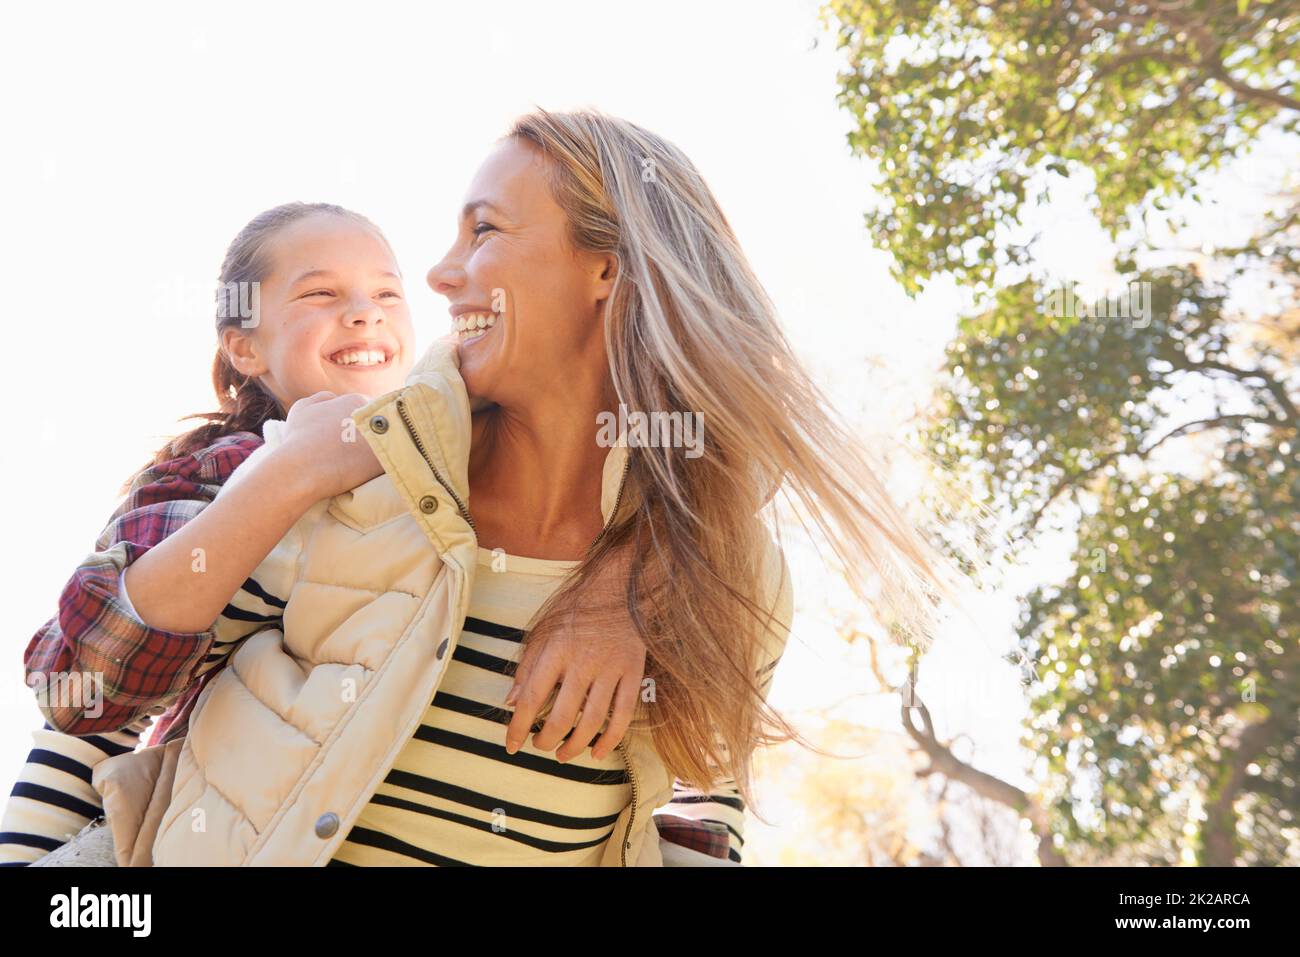 Playful family bonding. A happy mother and daughter spending time together outdoors. Stock Photo